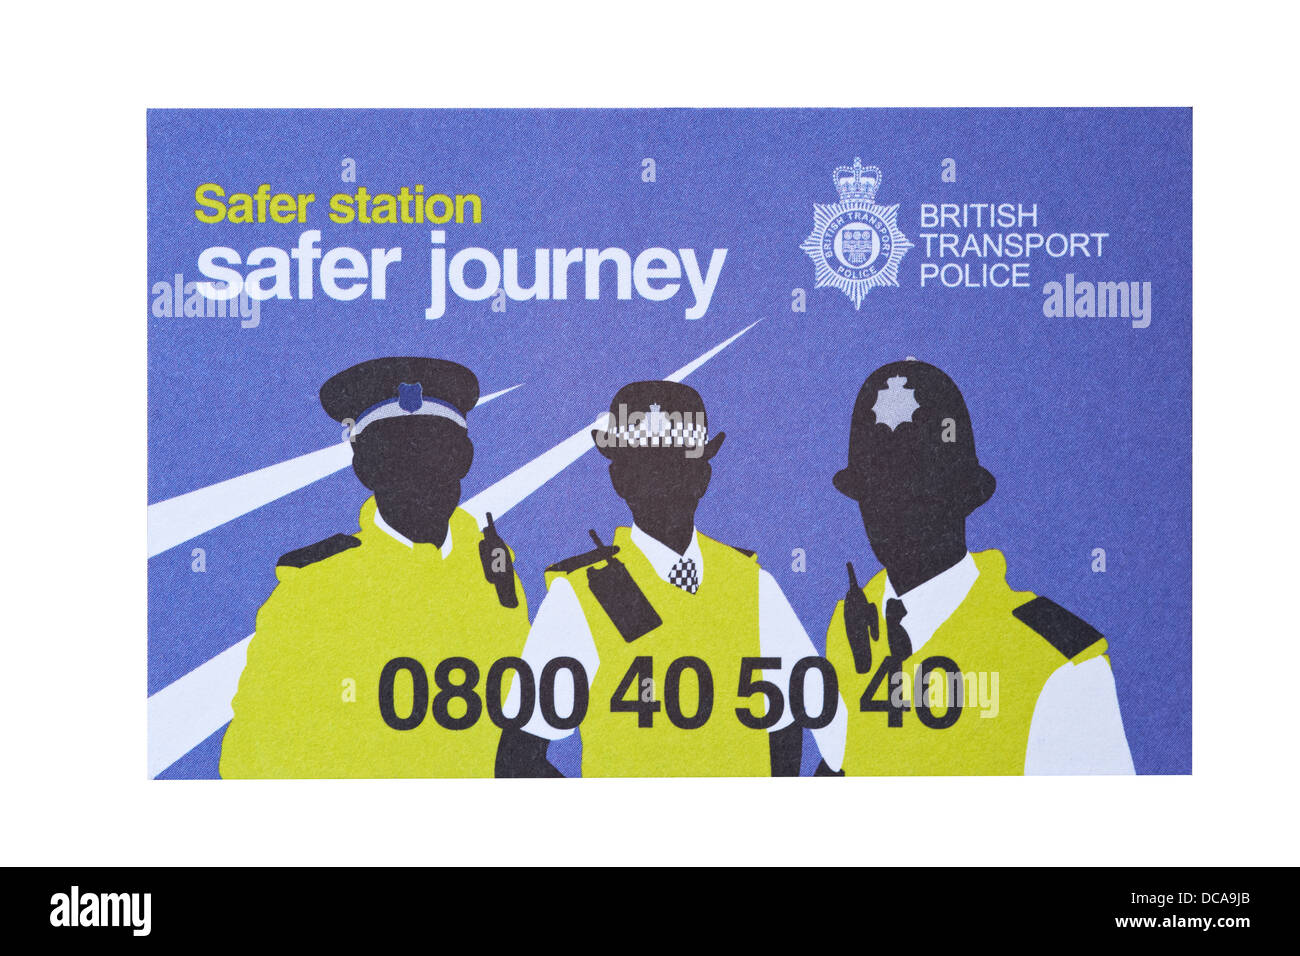 Information British Transport police for saver station and journey Stock Photo